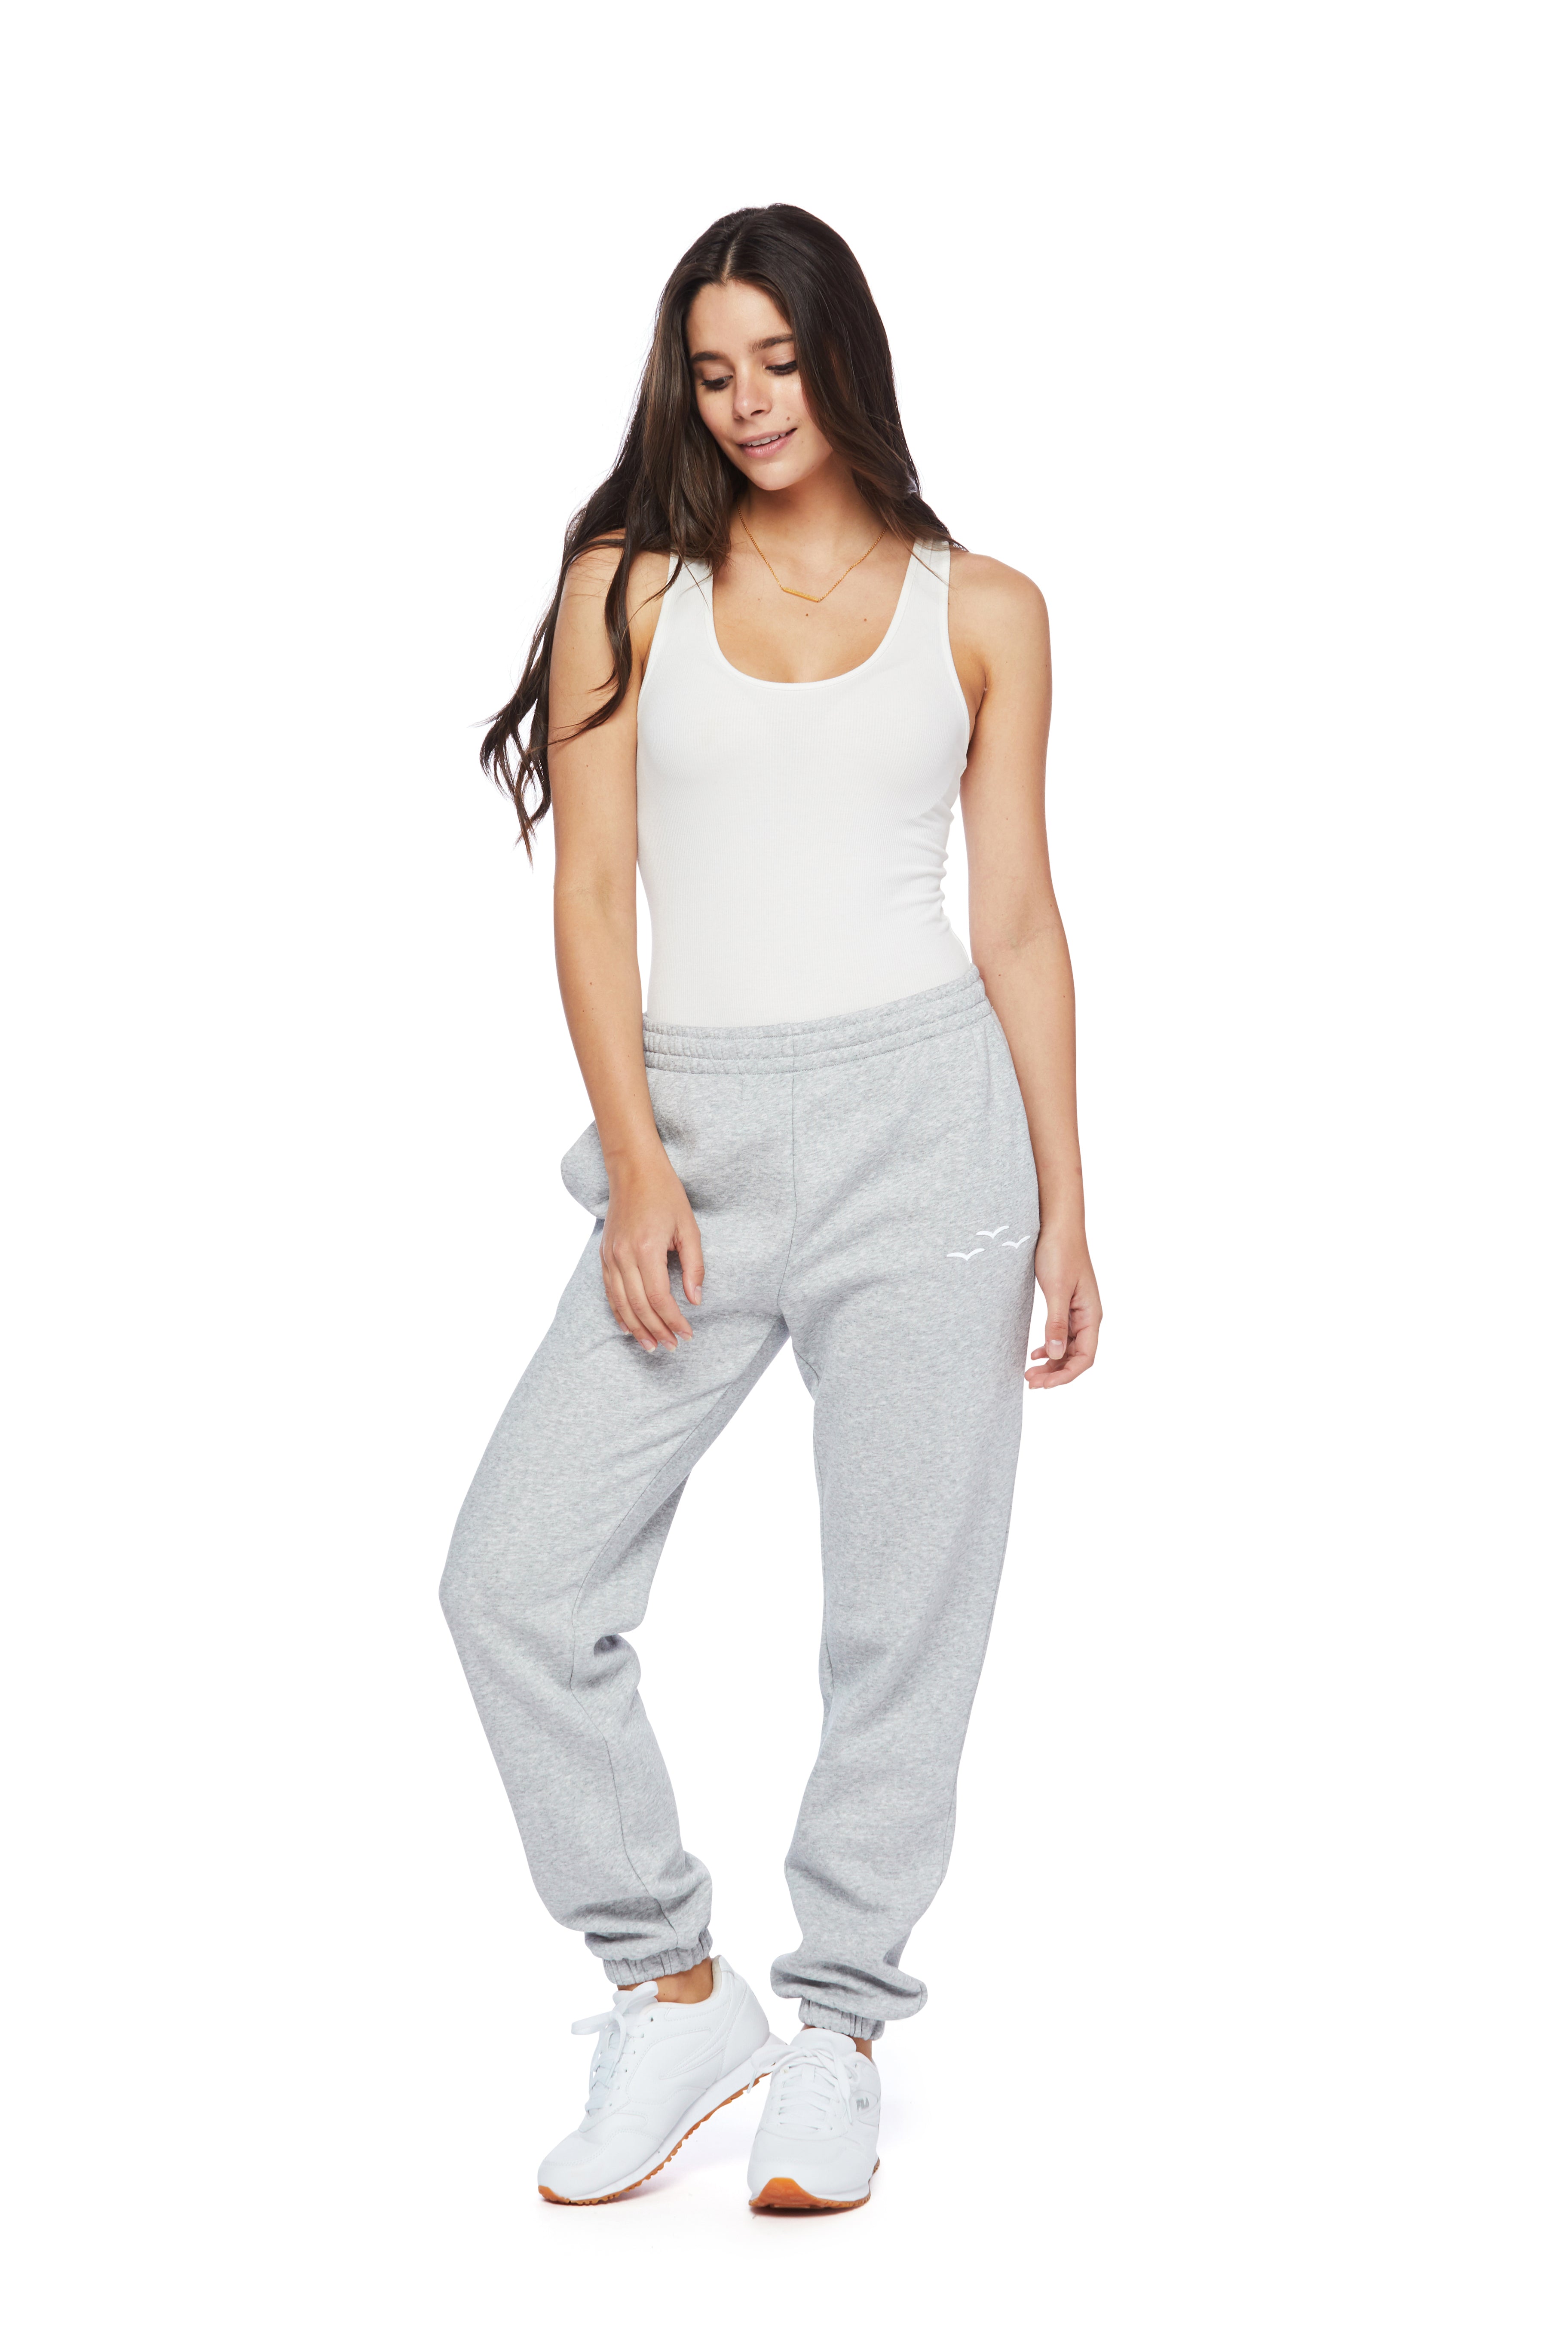 Nova Boyfriend Jogger in Classic Grey from Lazypants - always a great buy at a reasonable price.